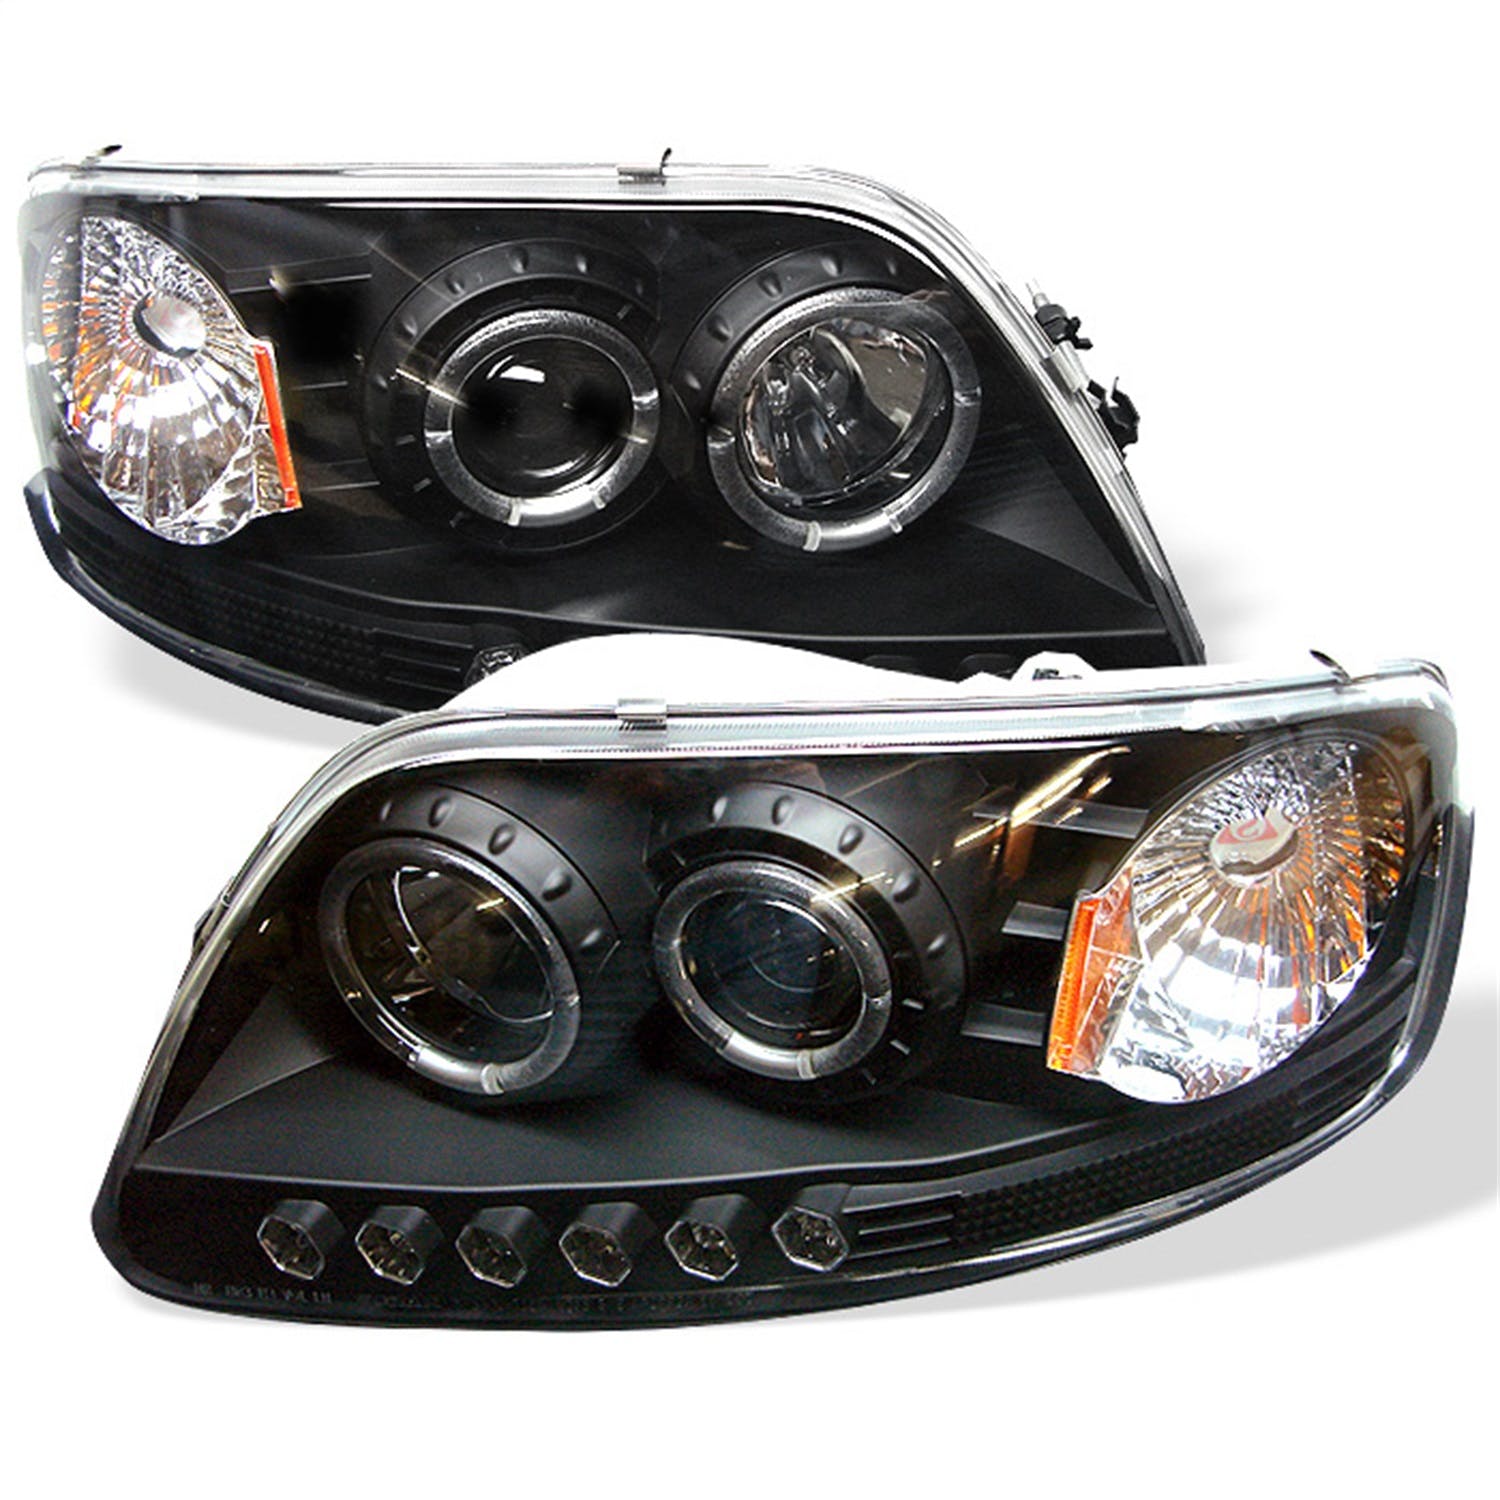 Spyder Auto 5010261 (Spyder) Ford F150 97-03/Expedition 97-02 1PC Projector Headlights-( Will Not Fi